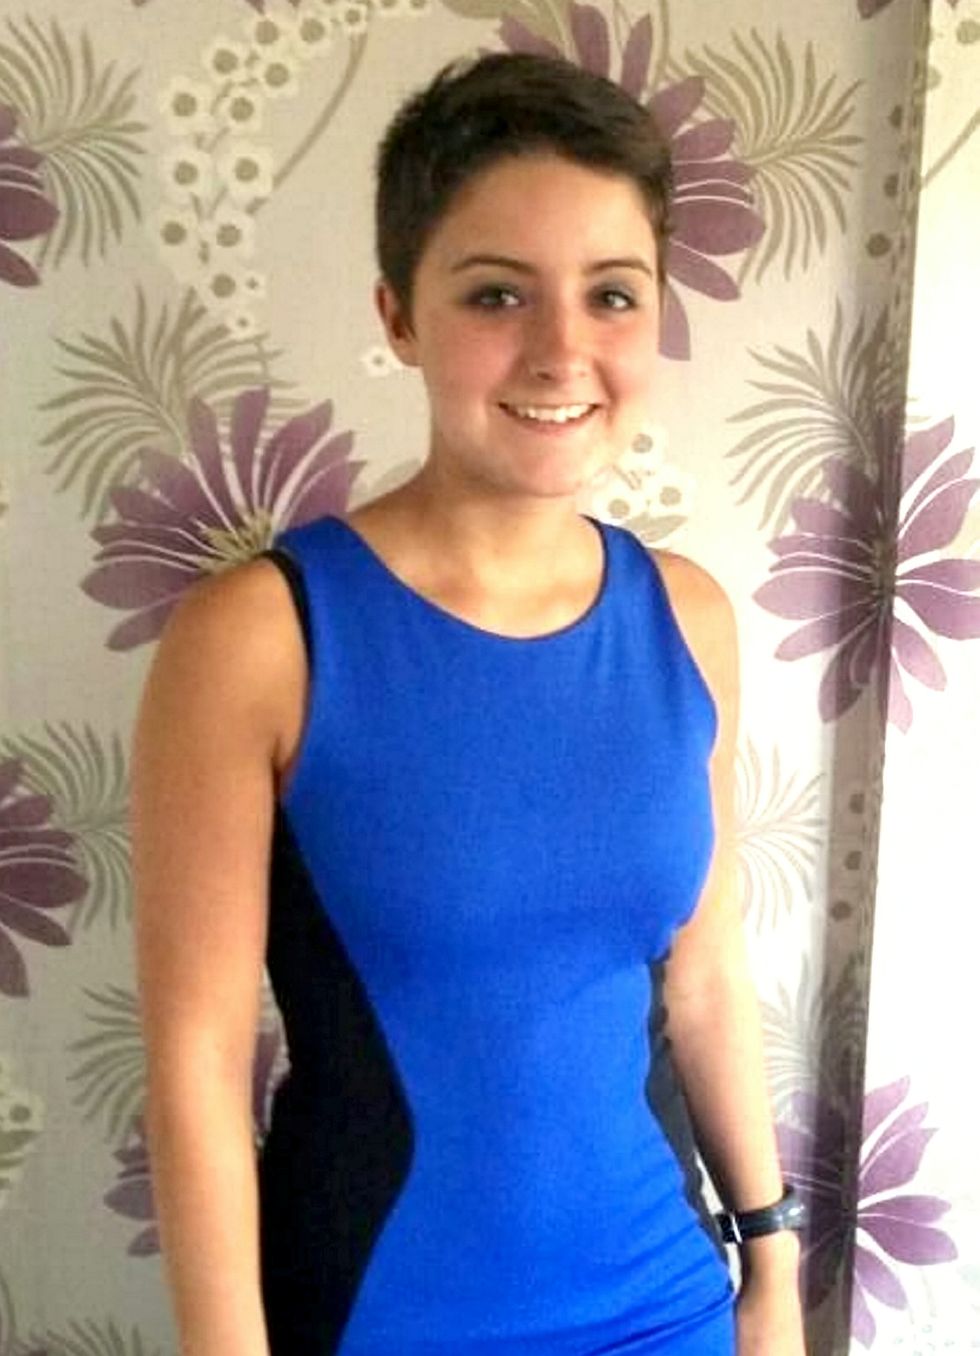 Teenage girl who believed she had super powers killed herself after climbing a 140ft building